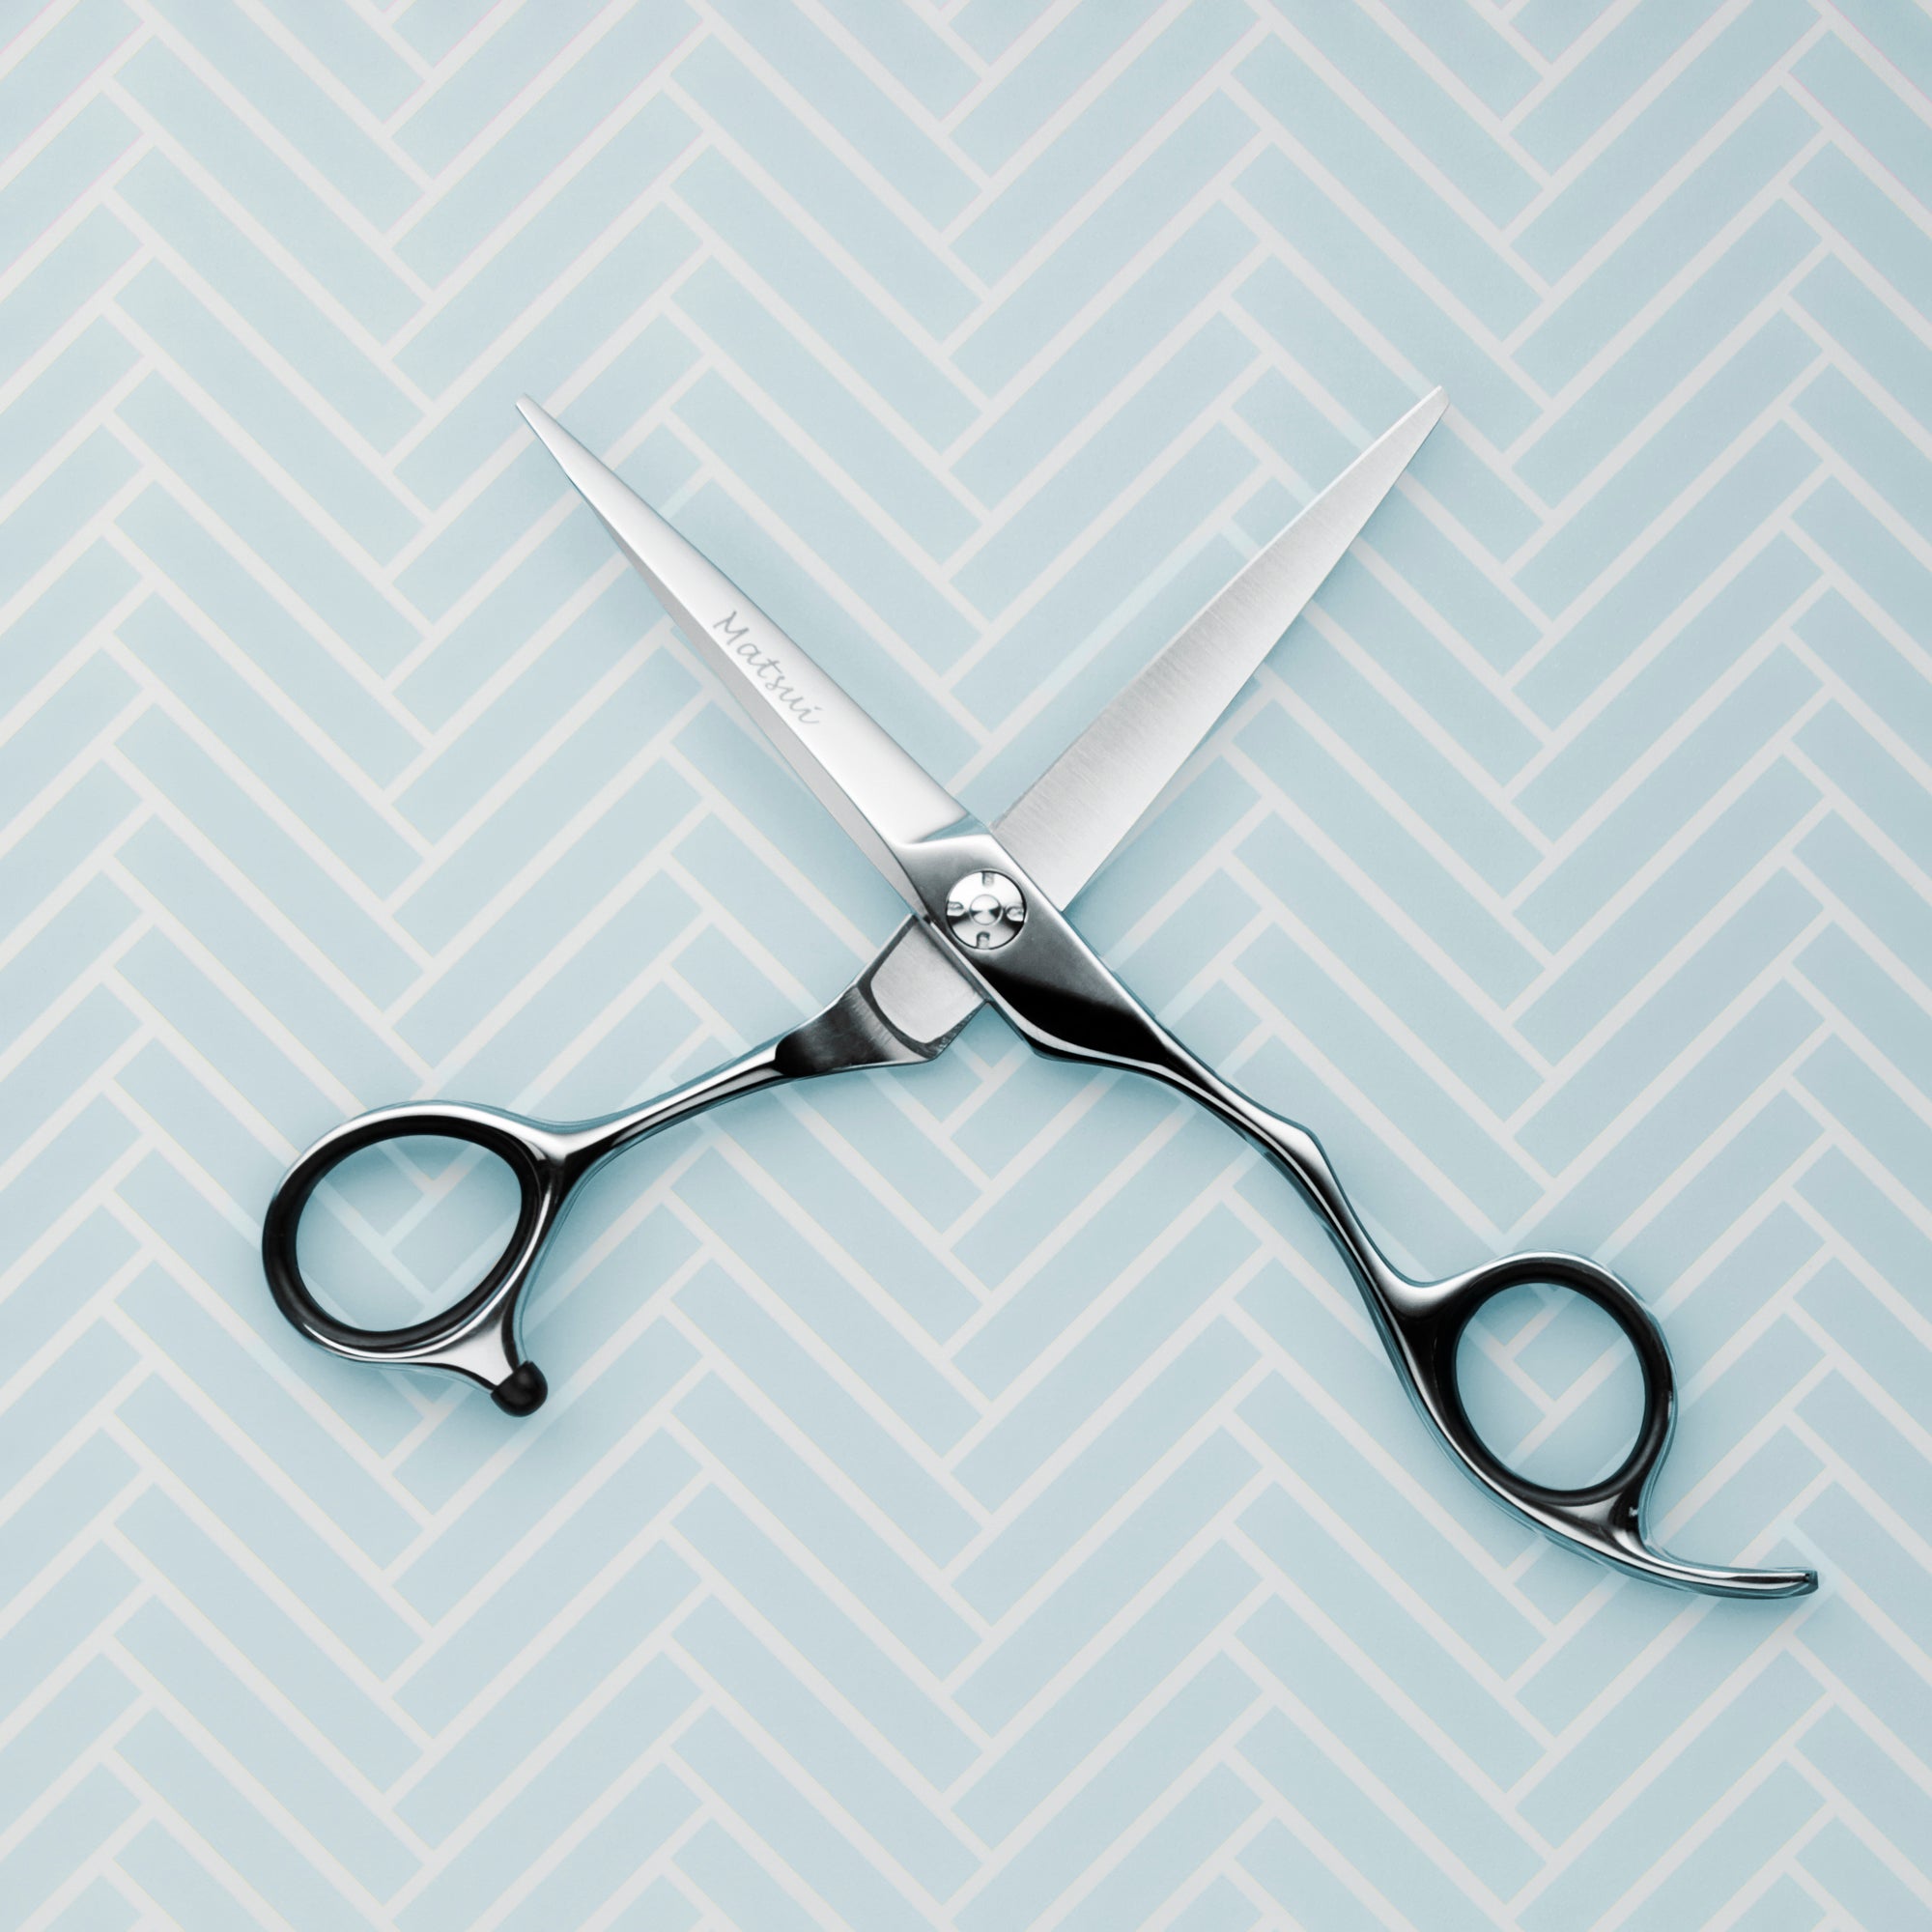 Why are hairdressing scissors so expensive?